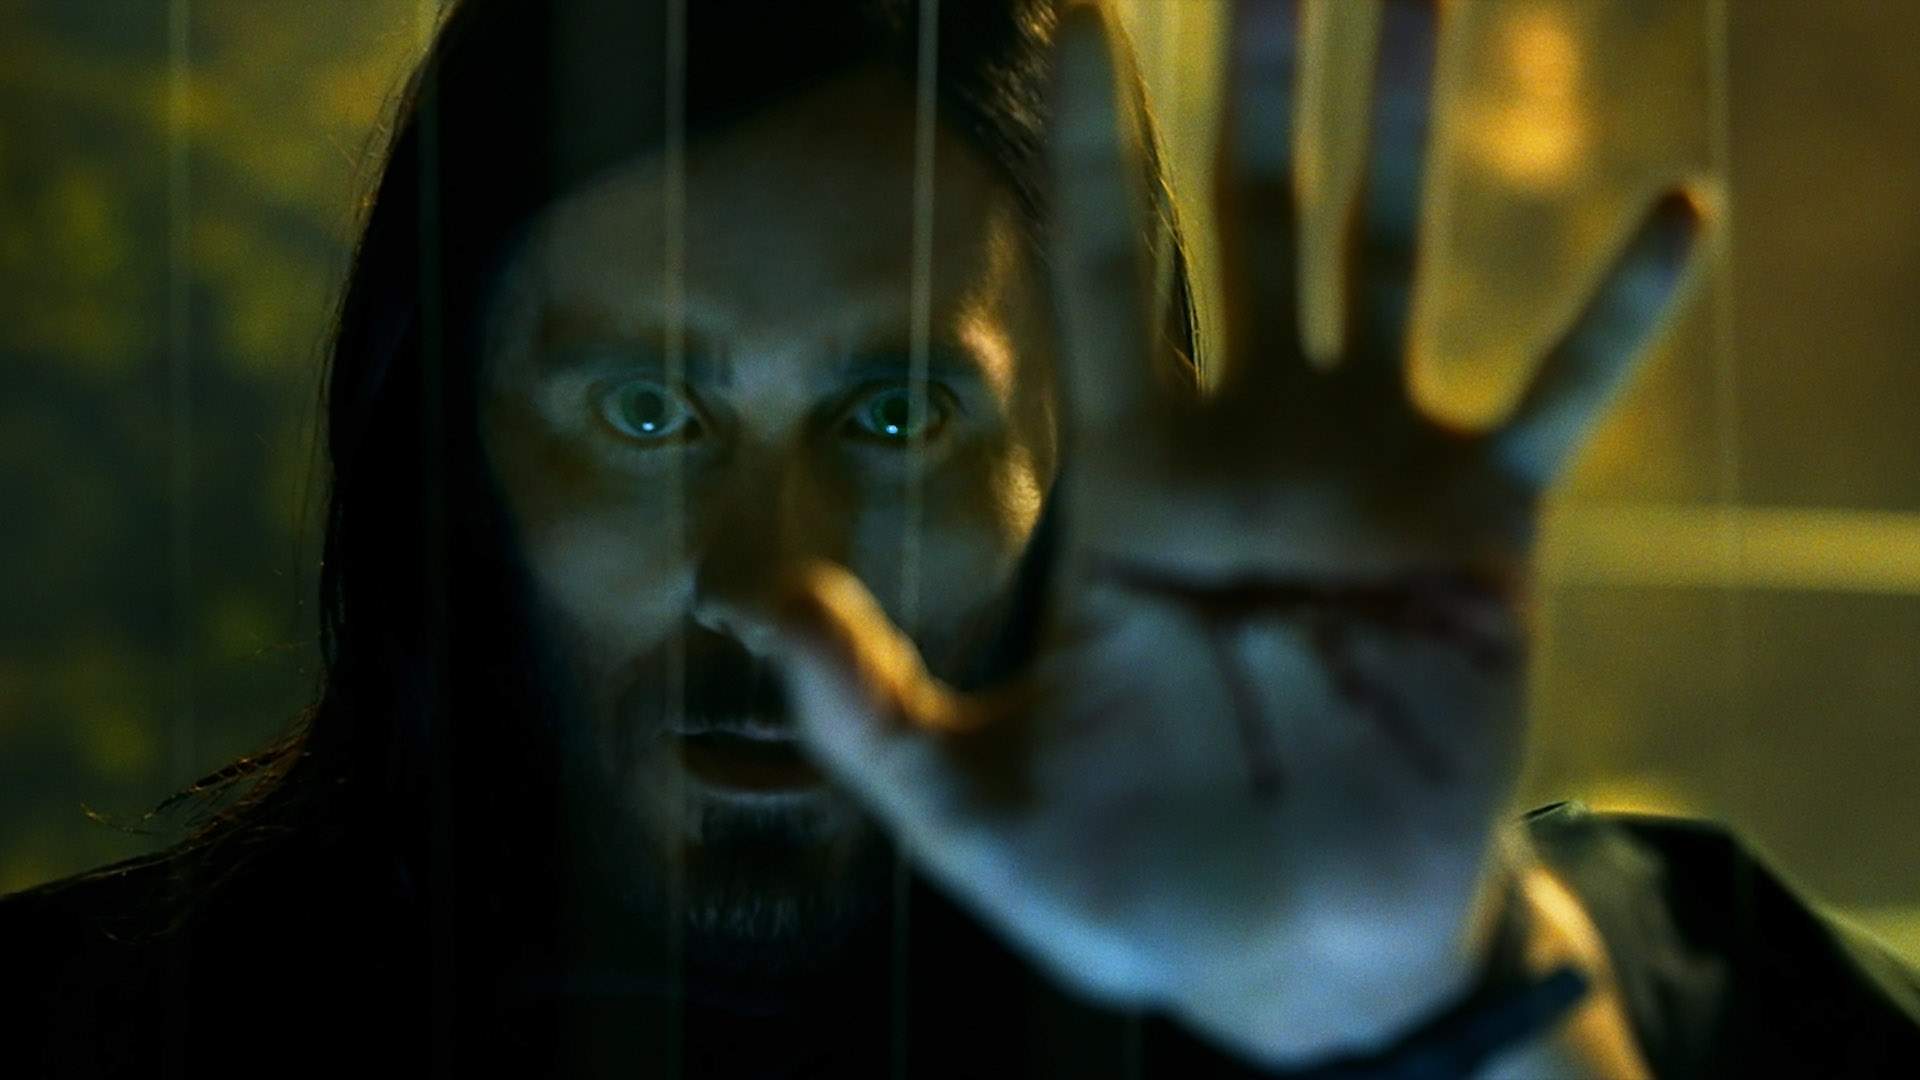 Jared Leto Turns Into a Vampire in the First Trailer for 'Spider-Man' Spinoff 'Morbius'